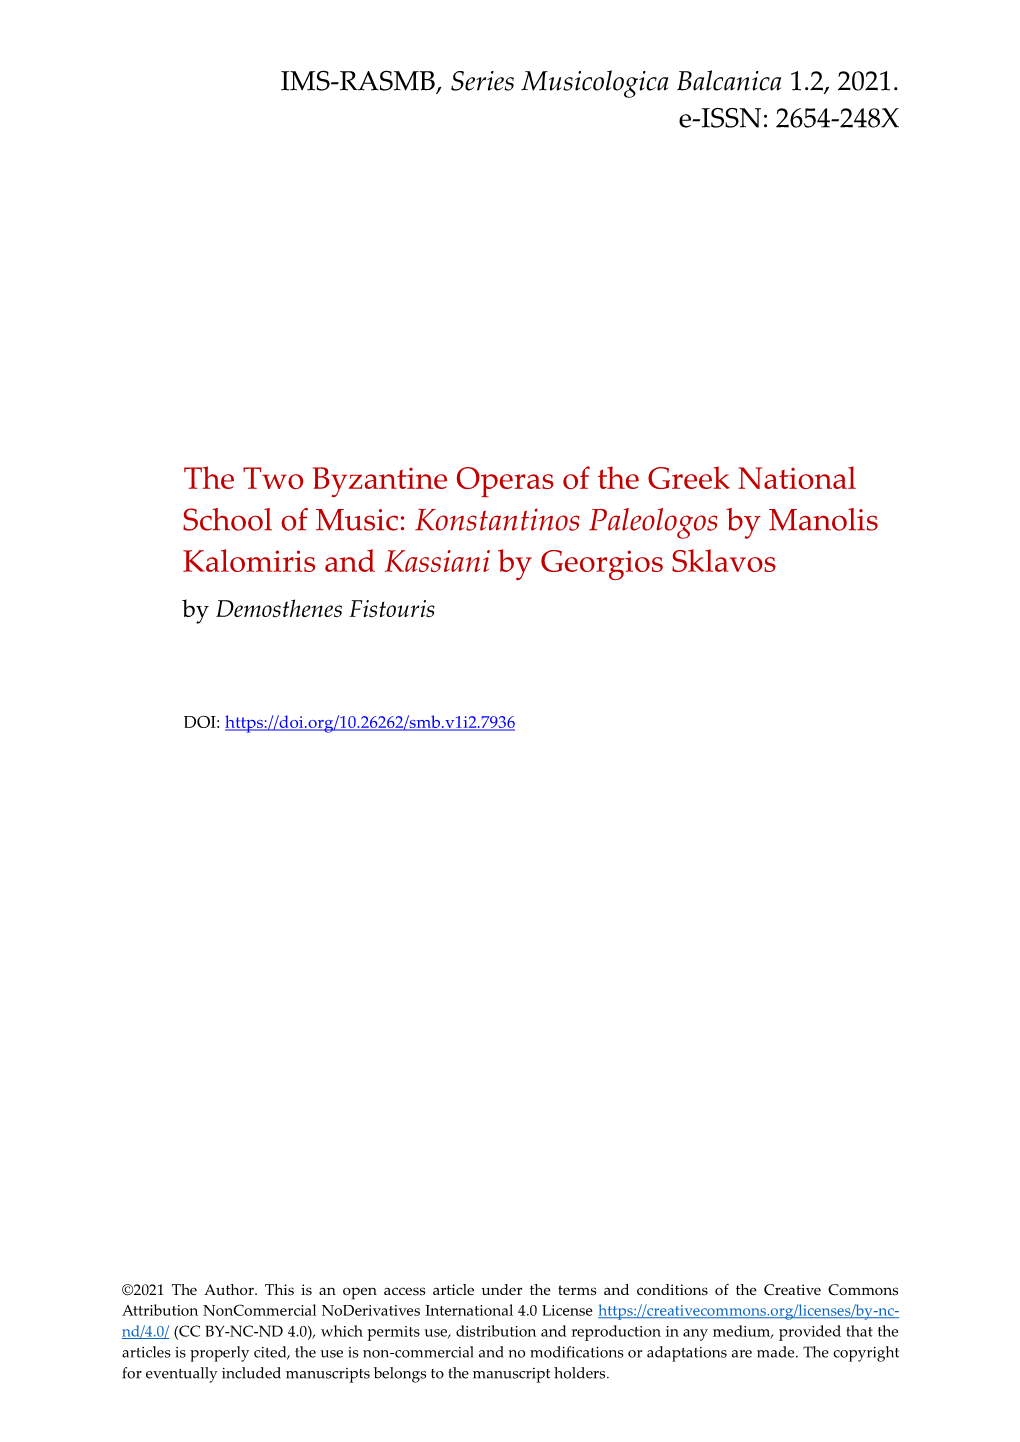 The Two Byzantine Operas of the Greek National School of Music: Konstantinos Paleologos by Manolis Kalomiris and Kassiani by Ge